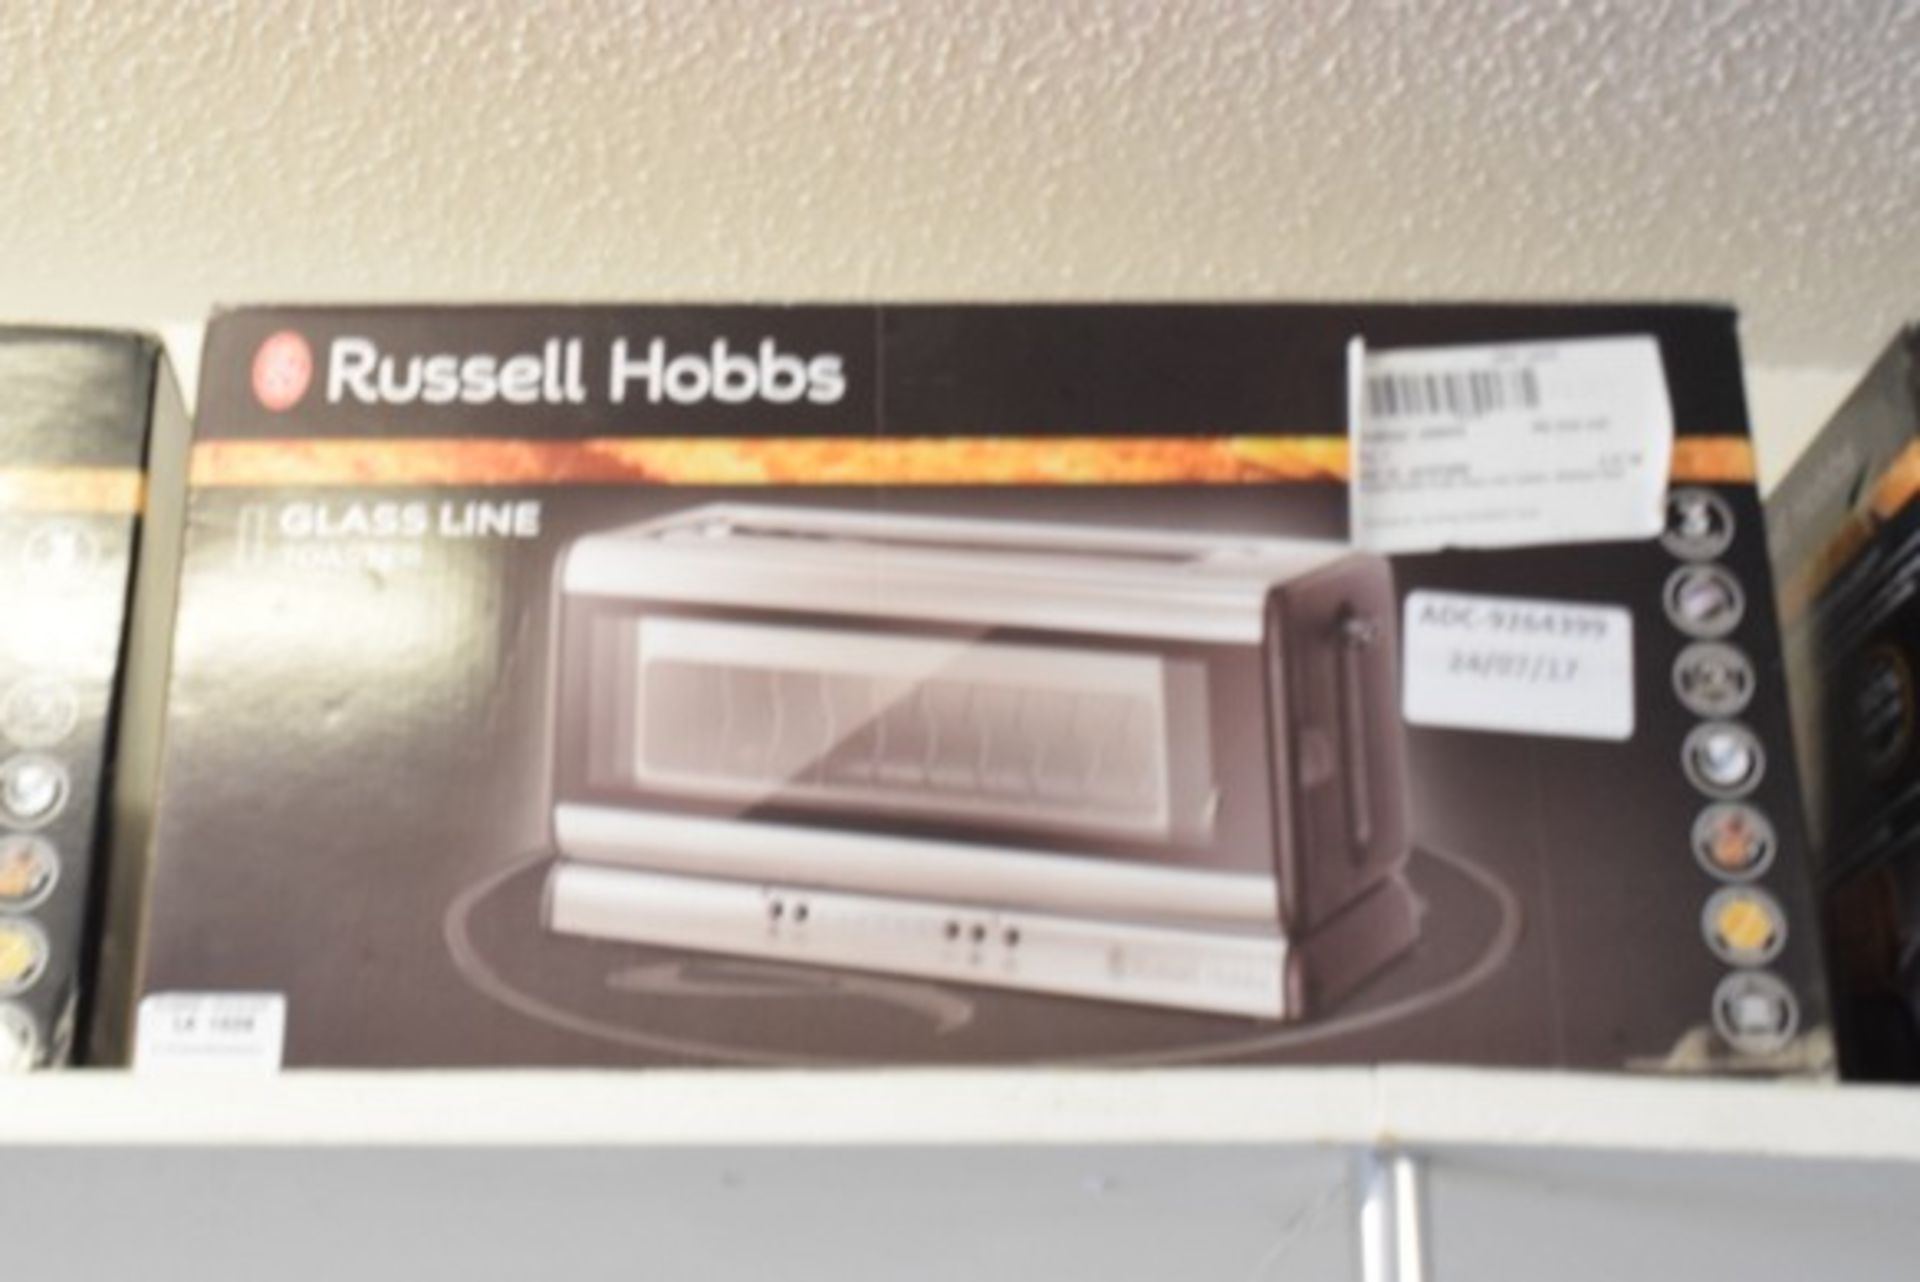 1 x BOXED RUSSELL HOBBS PURITY GLASS TOASTER RRP £50 24.07.17 *PLEASE NOTE THAT THE BID PRICE IS - Image 2 of 2